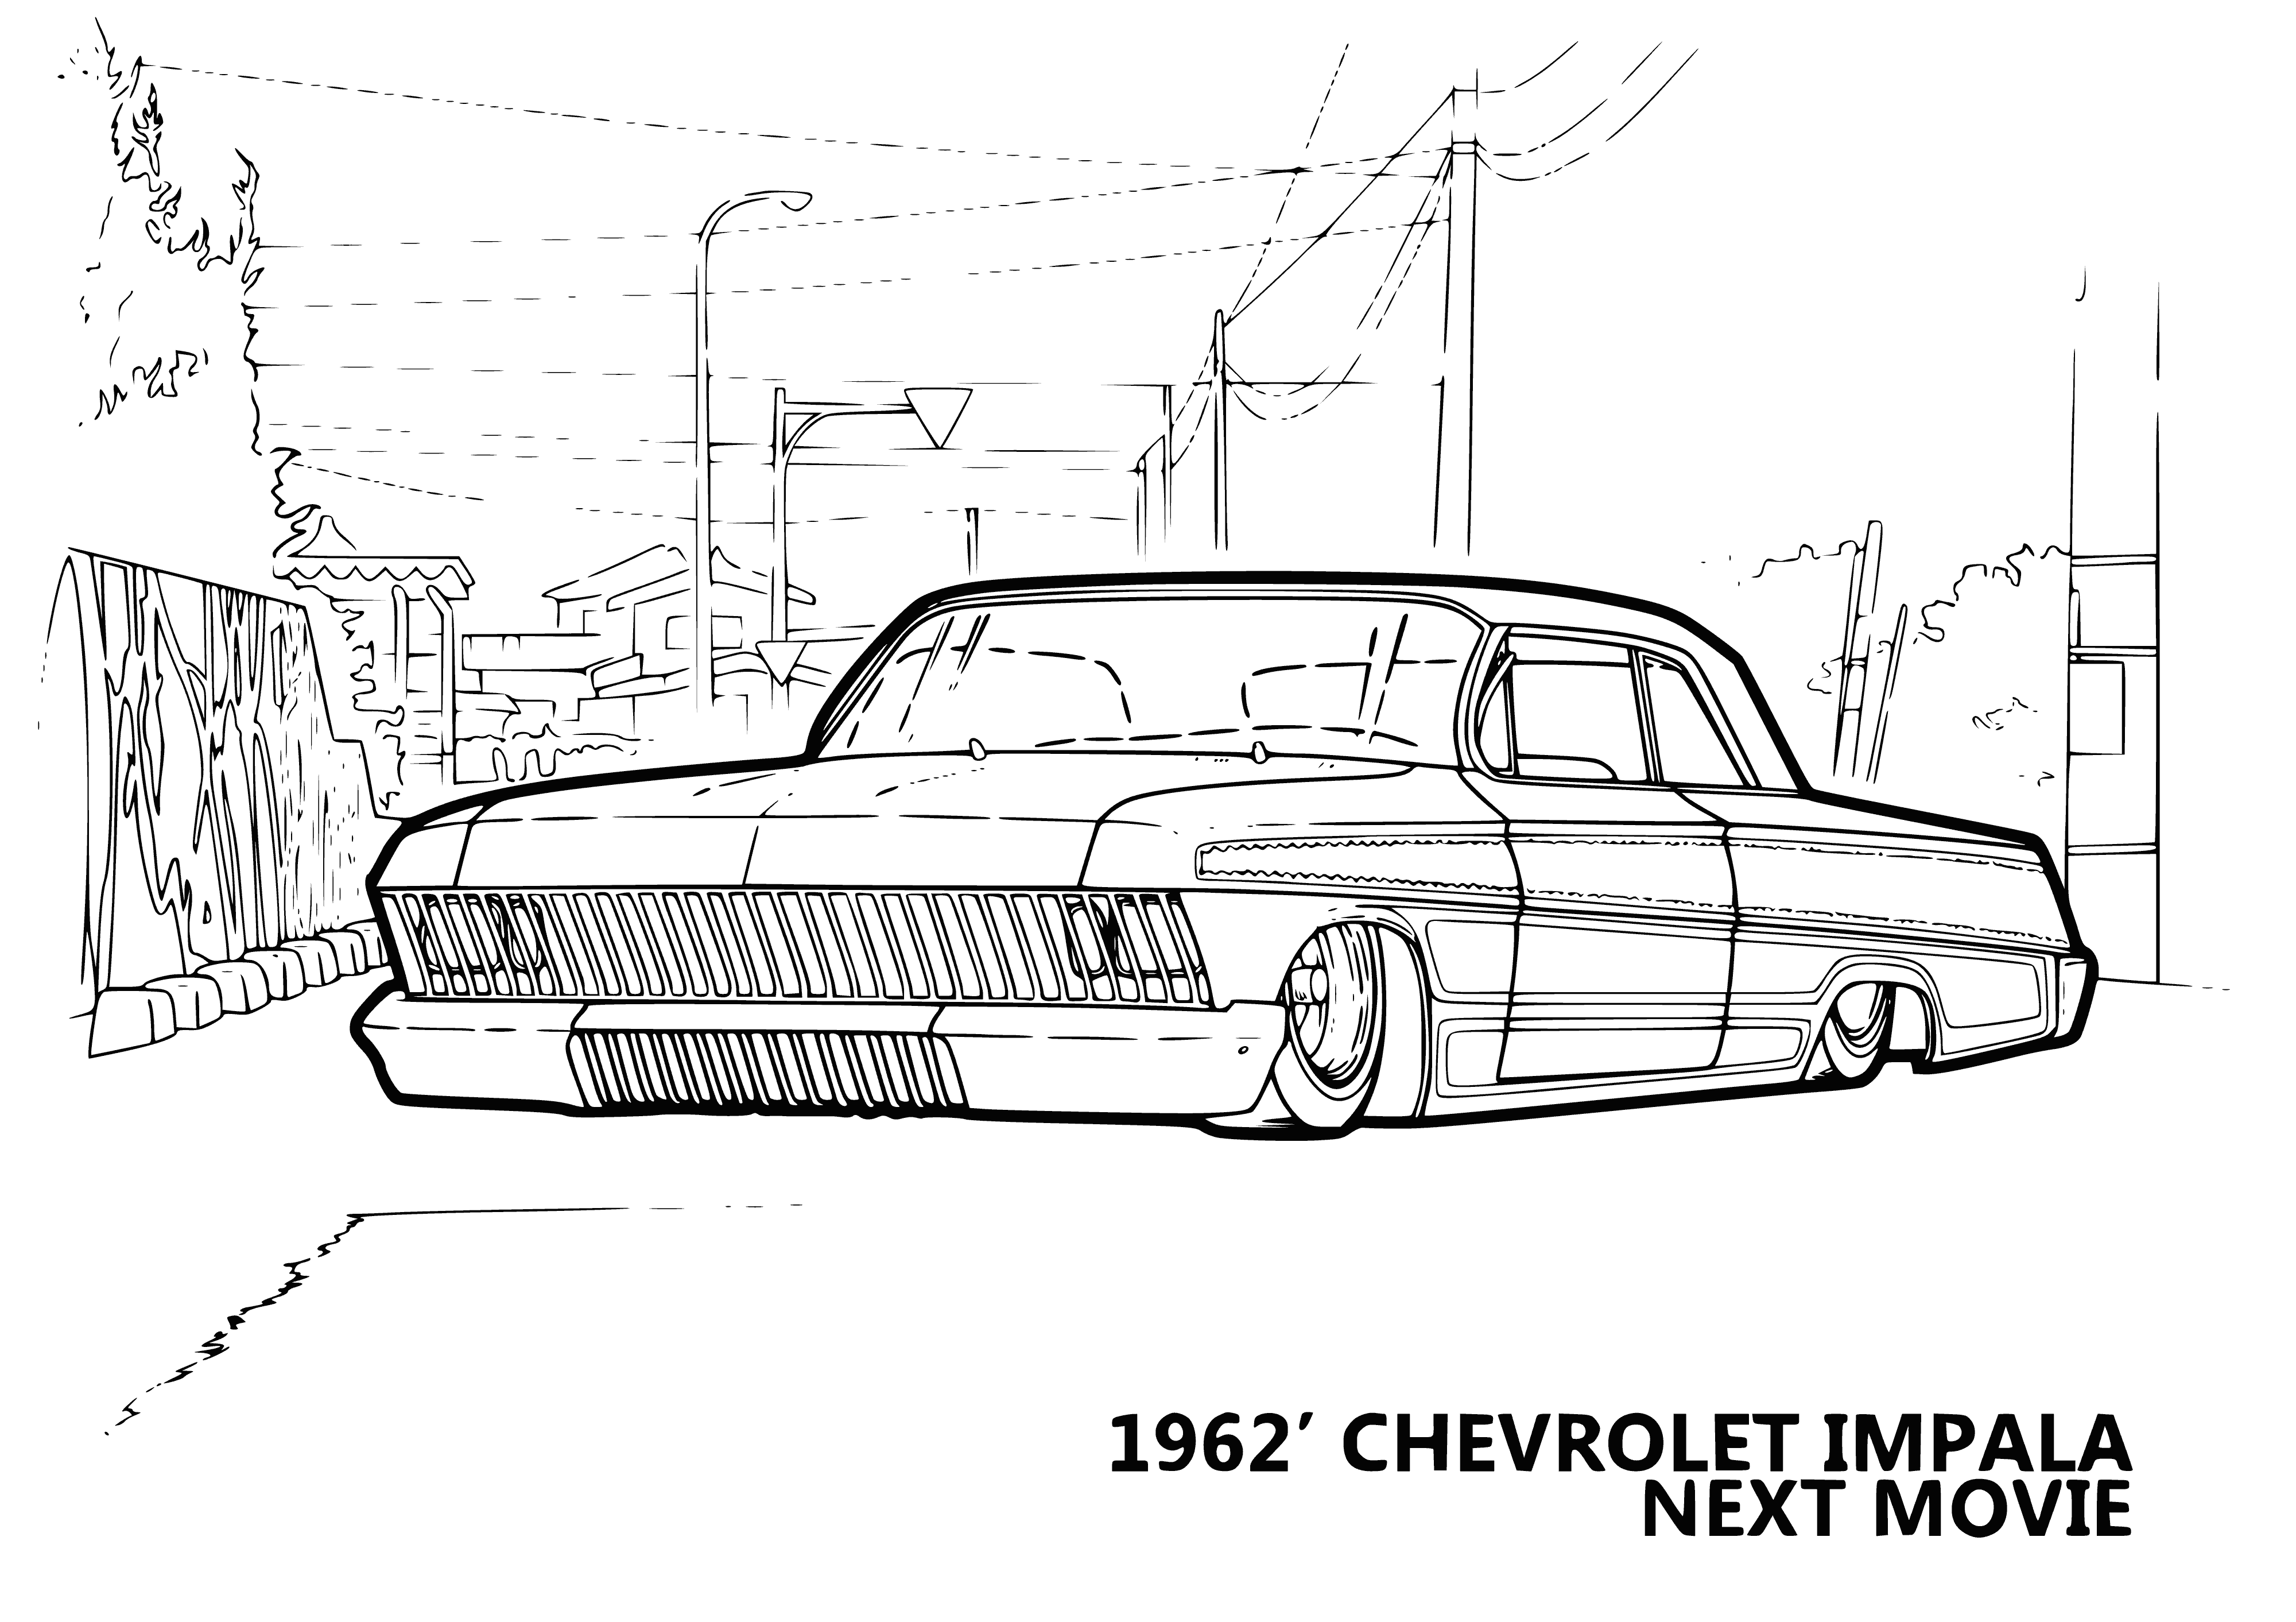 coloring page: A yellow Chevy w/ black convertible parked in a driveway: black grille, Chevrolet logo, 2 doors & 4 seats.